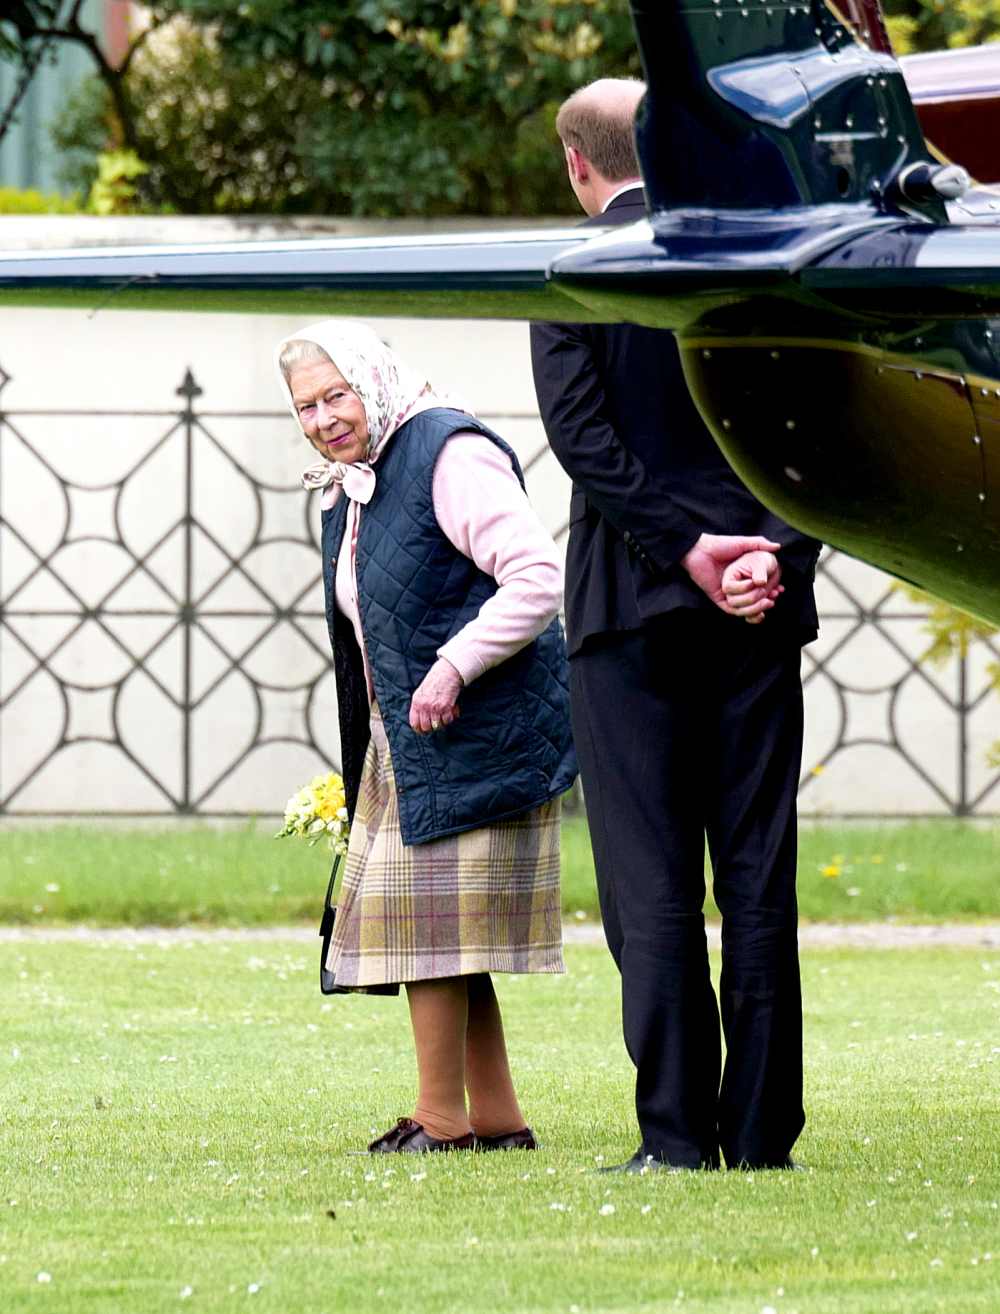 The Queen arrives at Kensington Palace by helicopter to meet Prince Louis for the first time on April 30, 2018.